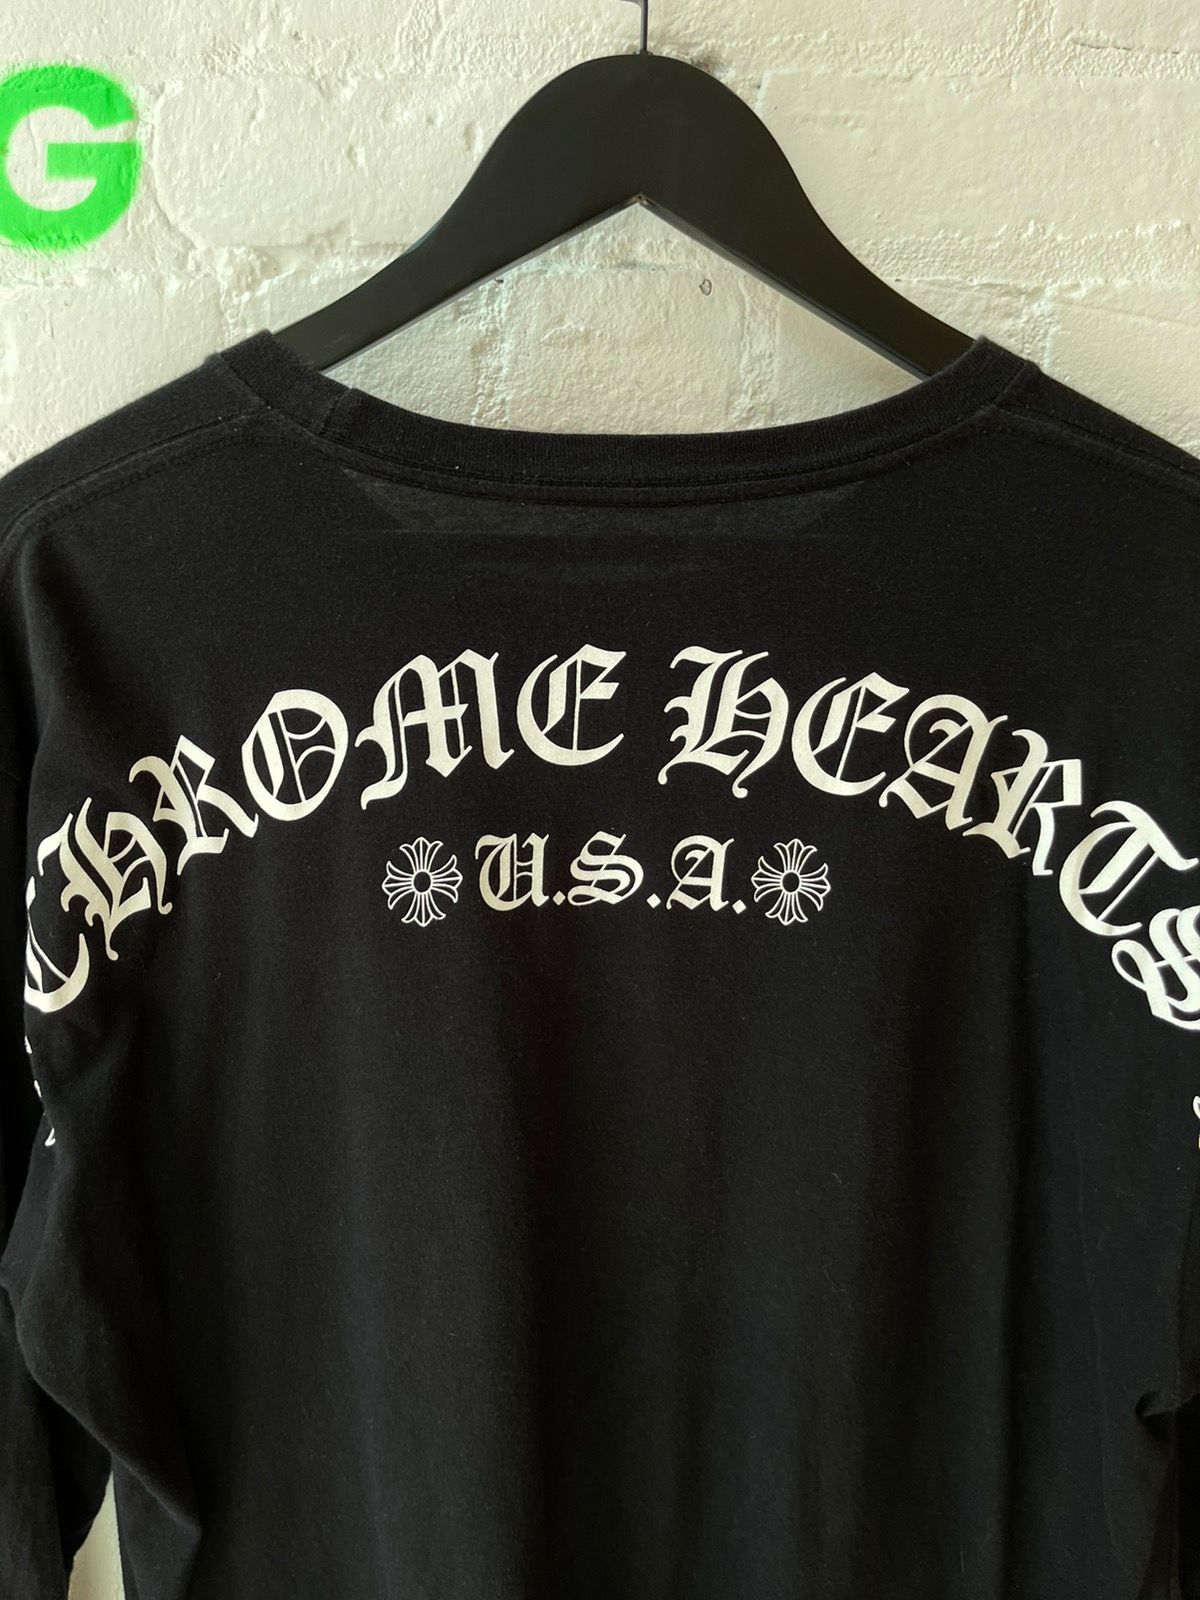 Chrome Hearts SPELL OUT ACROSS BACK Long Sleeve Shirt L